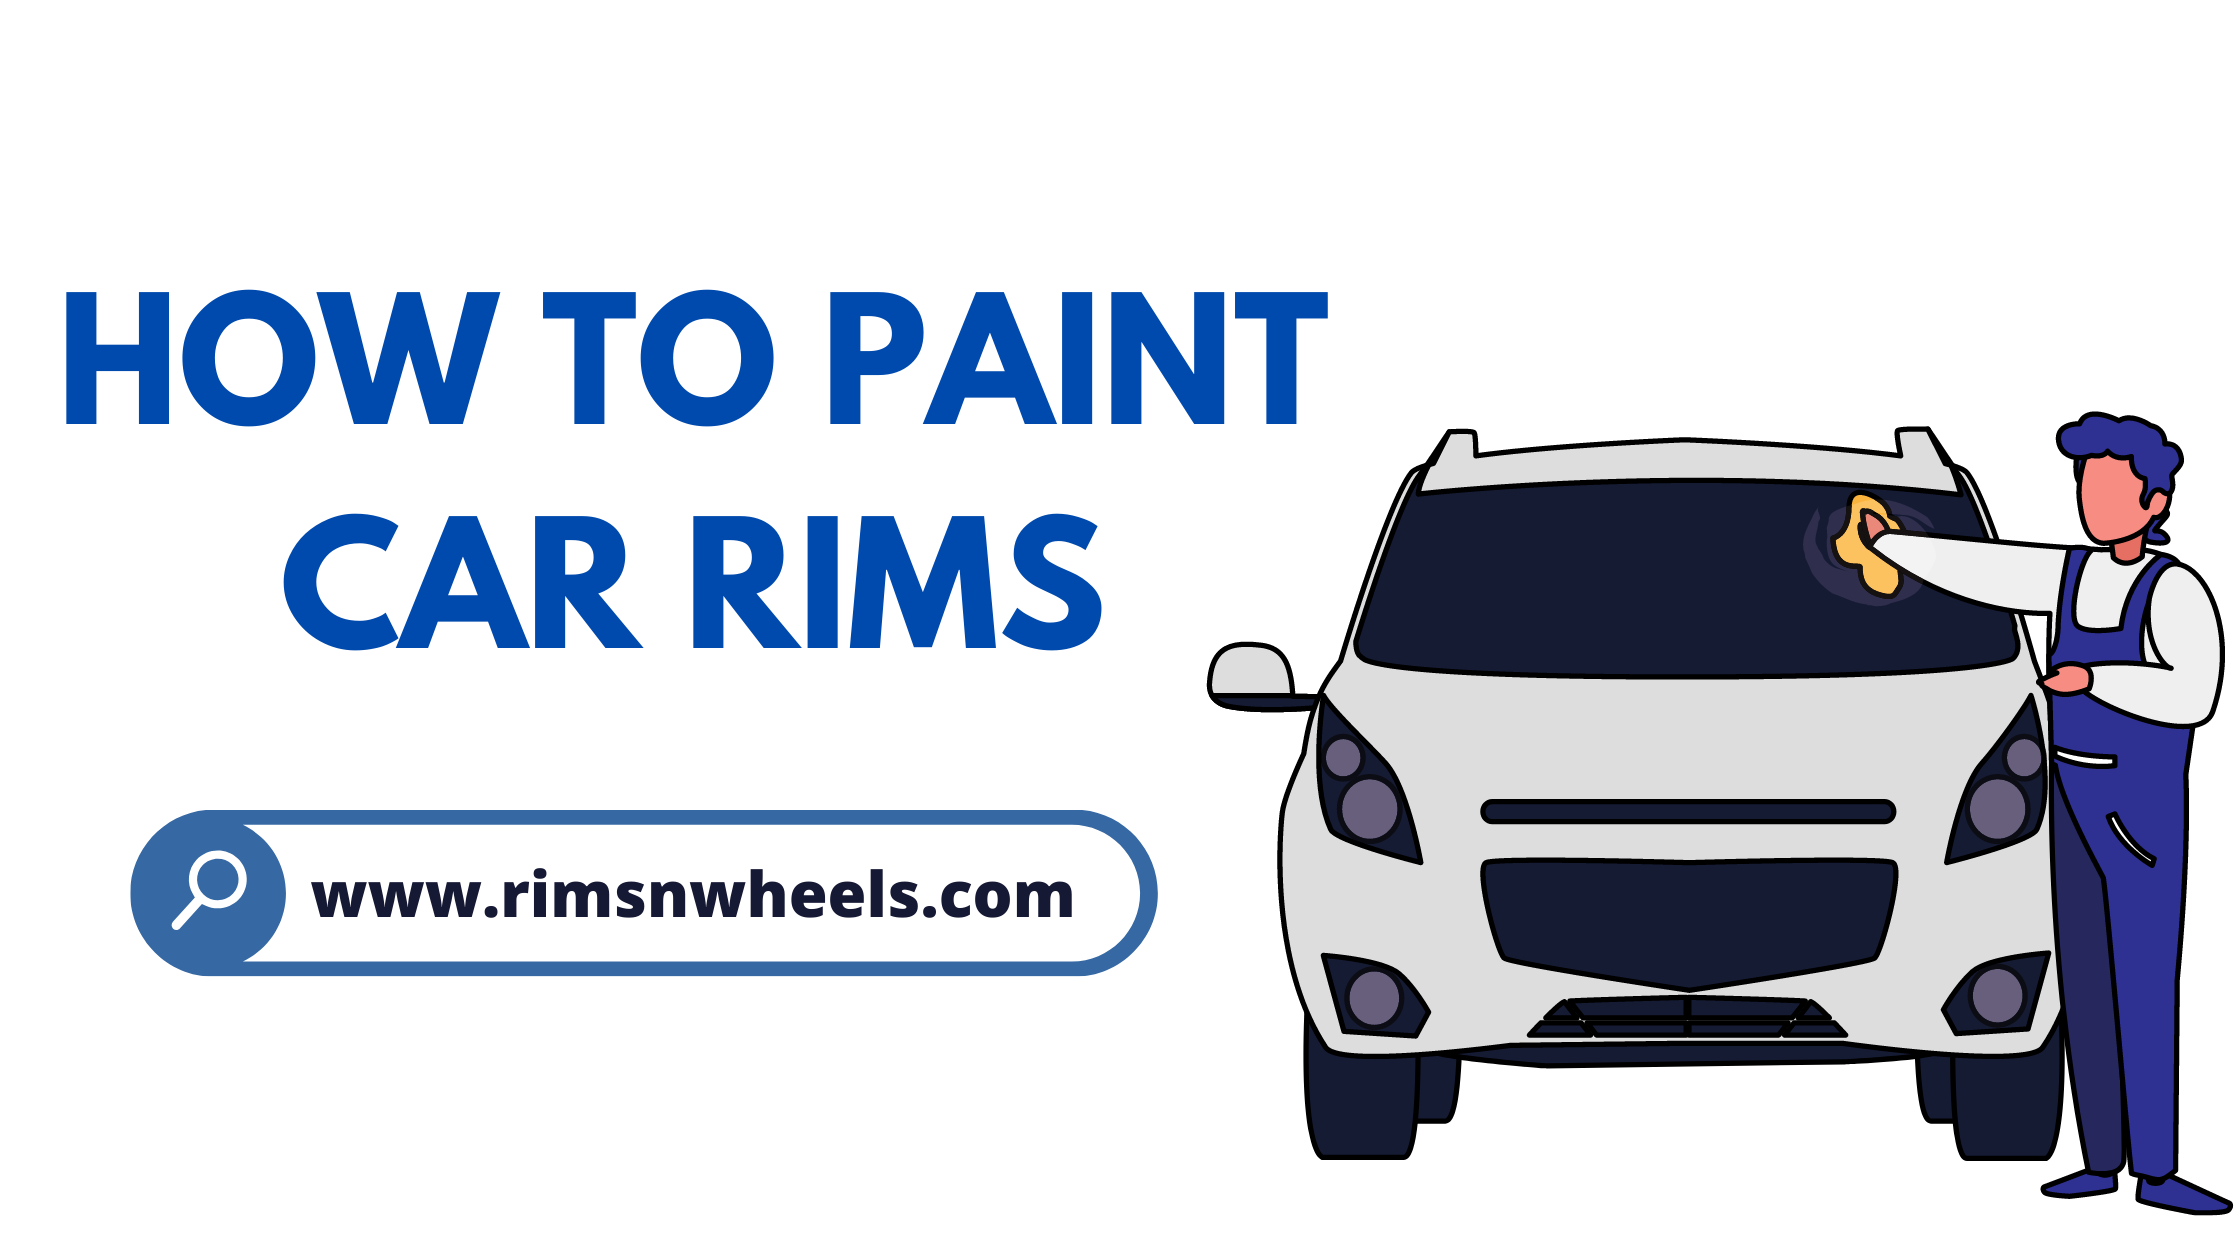 How To Paint Car Rims In Easy Steps? Quick Guide